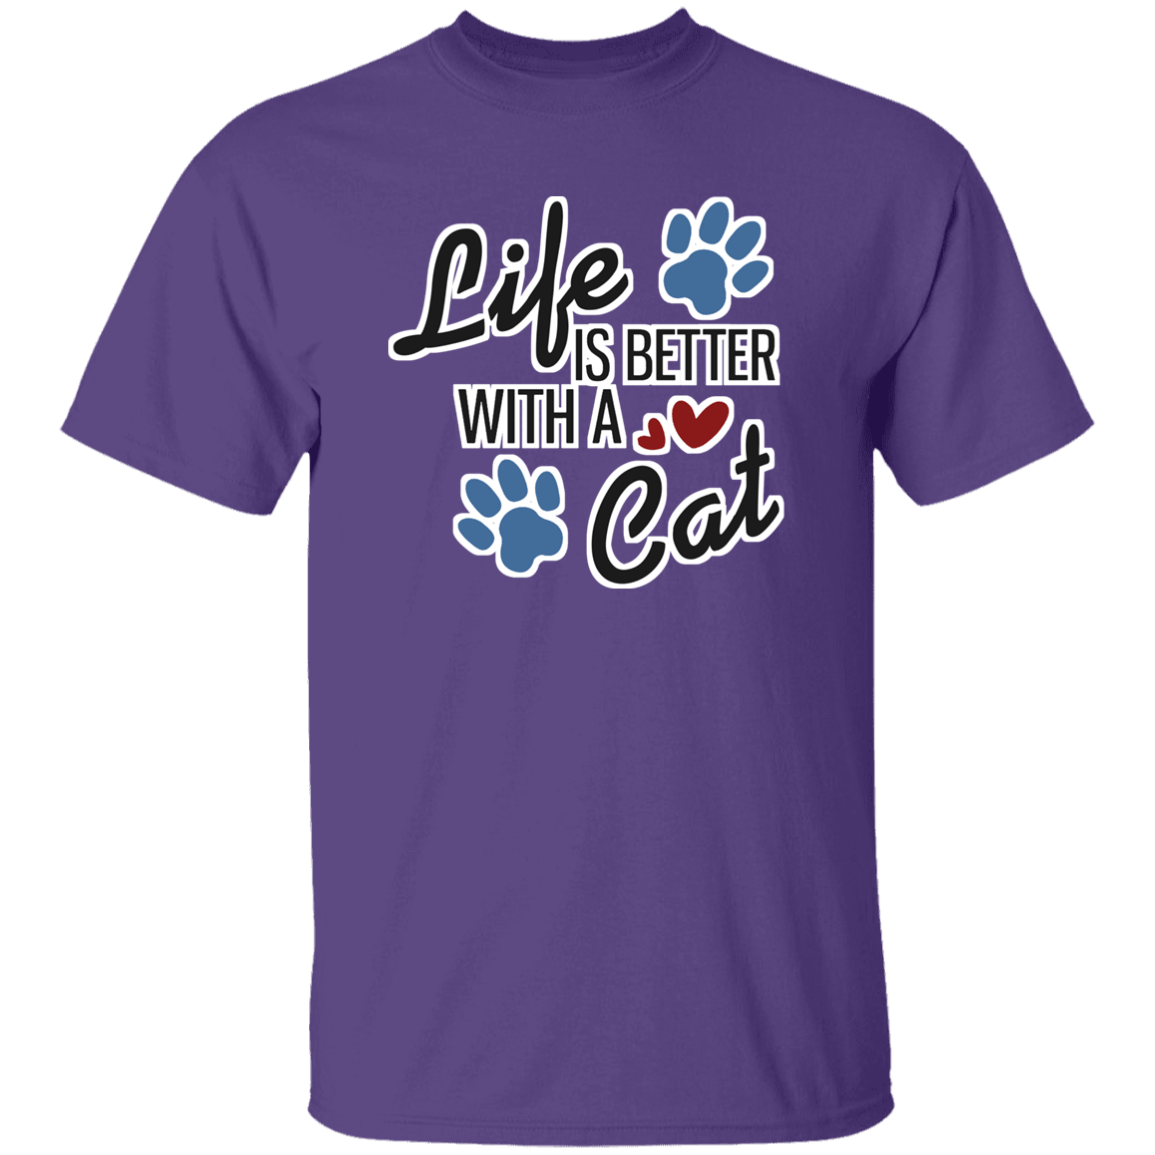 Life is Better with a Cat - Youth T-Shirt.